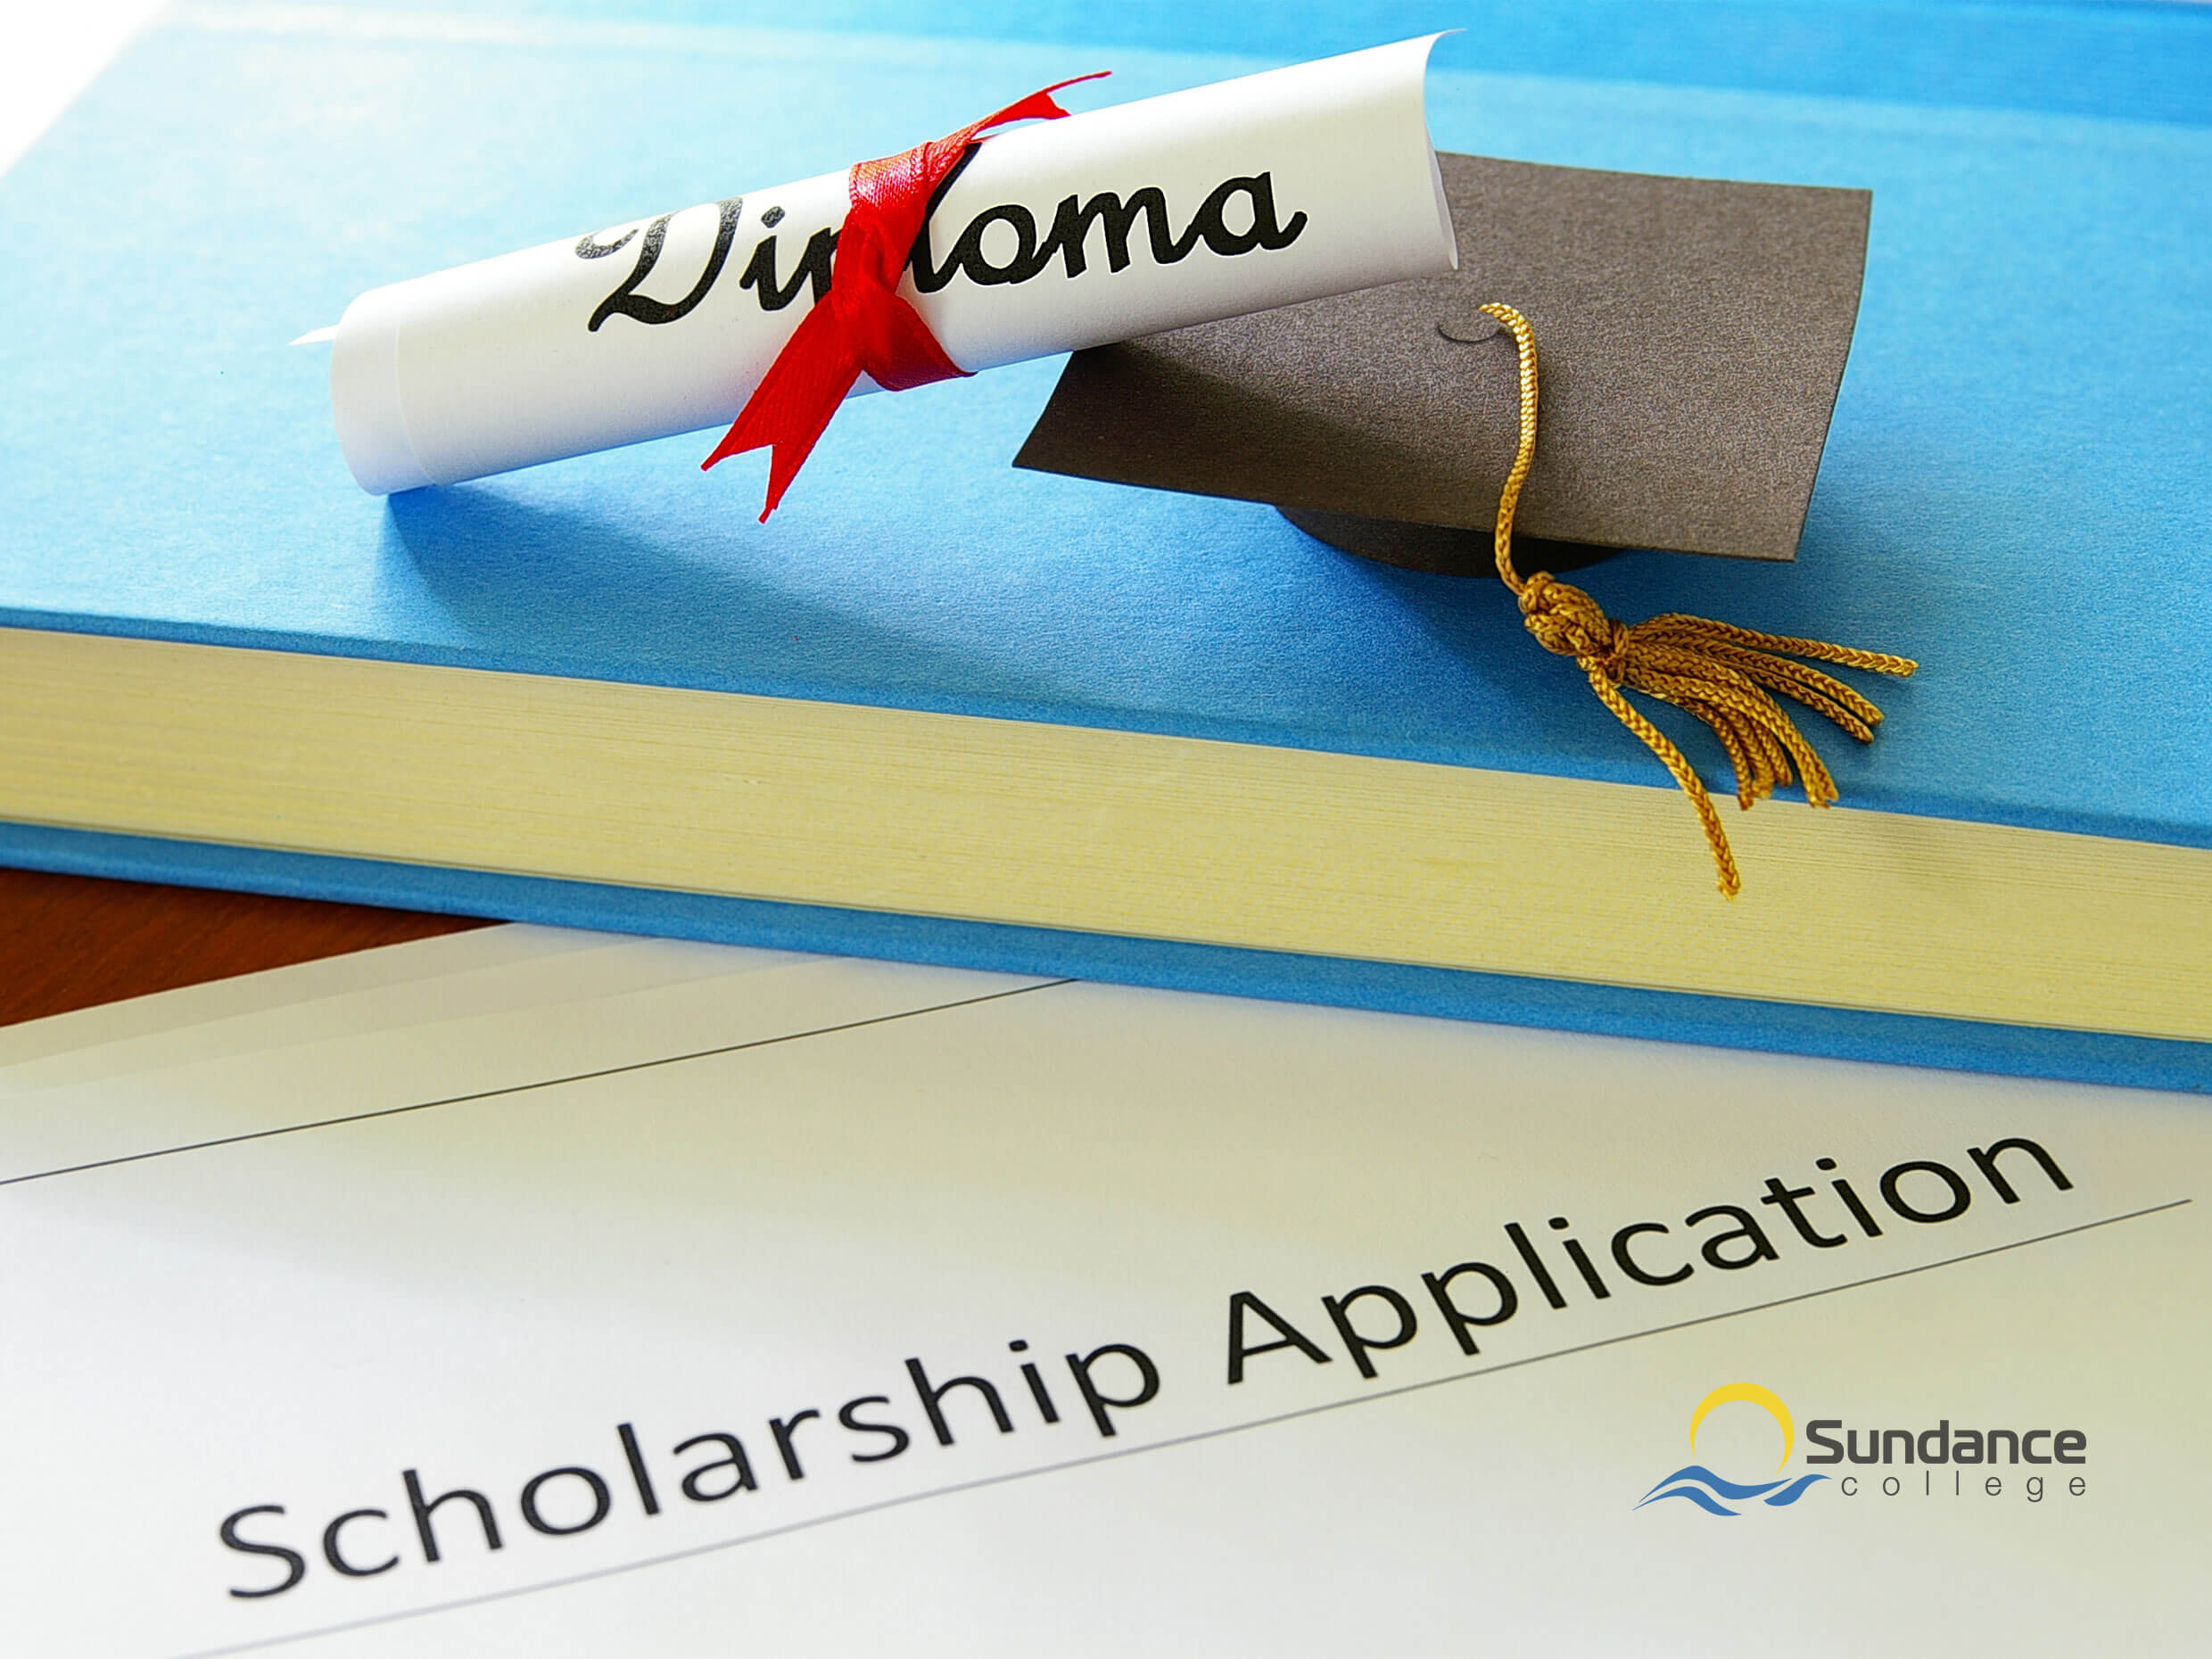 A photo of a diploma resting on a textbook, weighing down a scholarship application form with a Sundance College logo on it